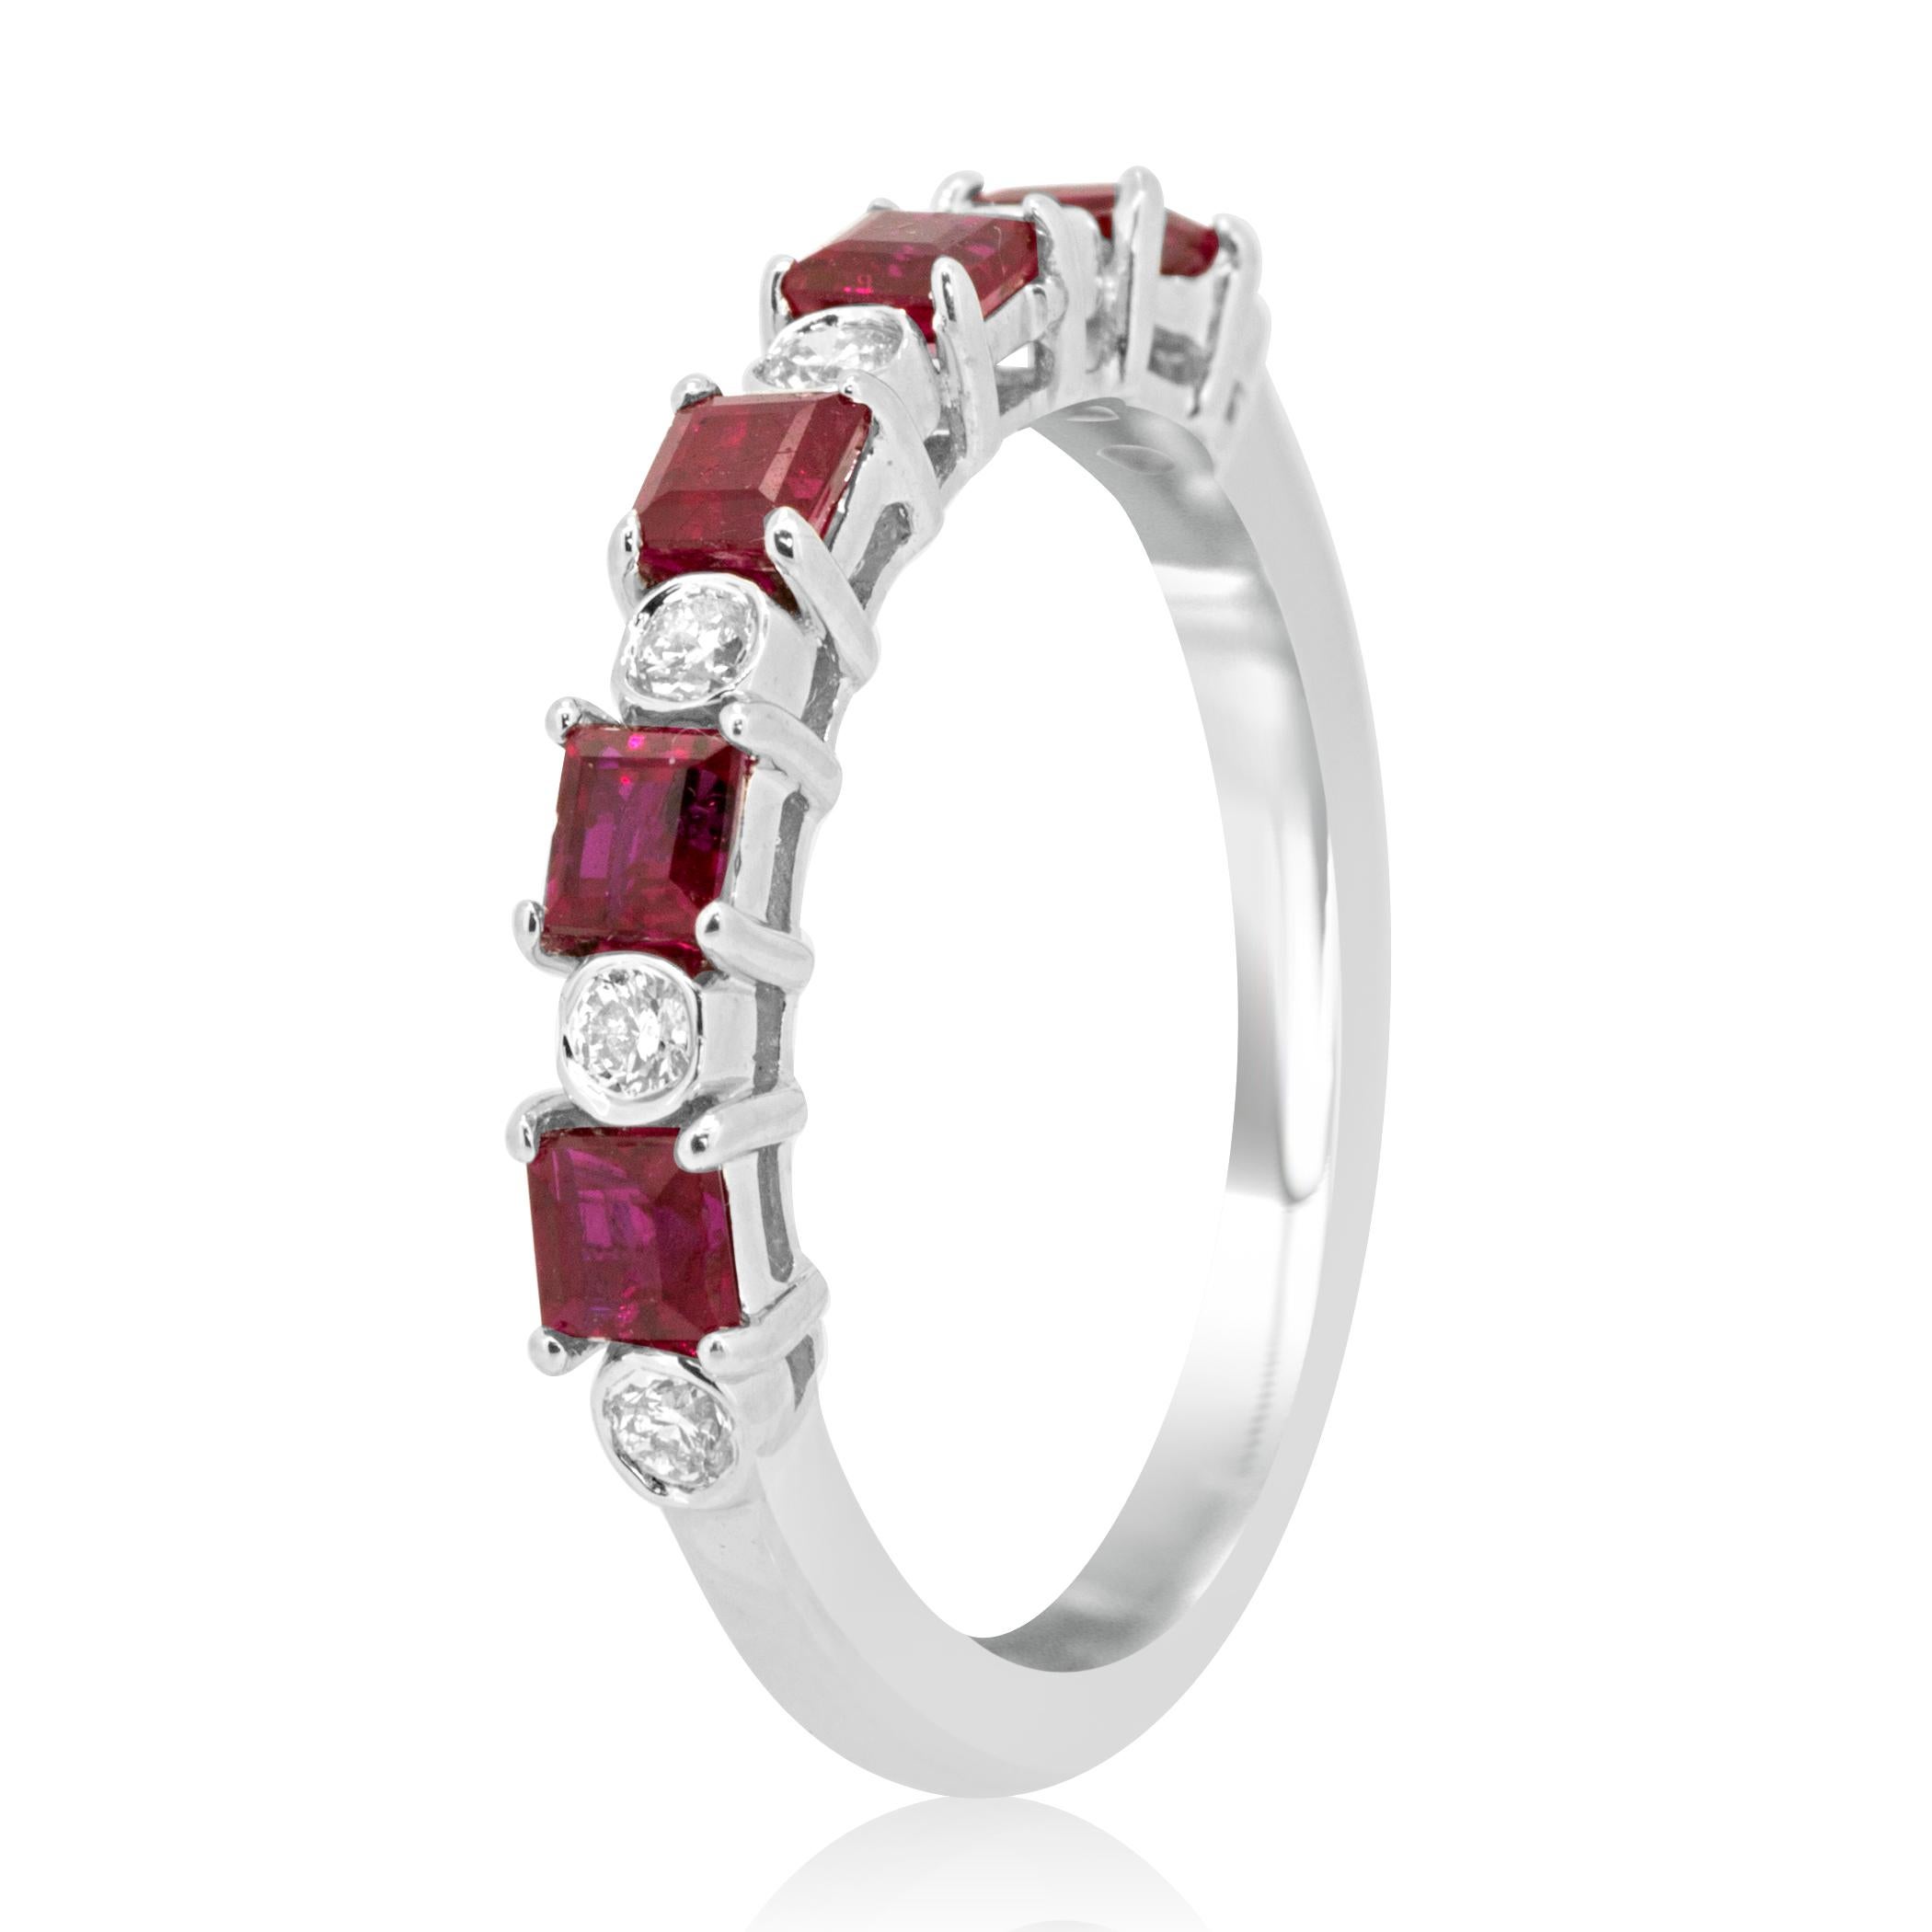 5 Ruby Square 0.90 Carat set alternatively with 6 White G-H Color VS-SI Diamond Round 0.20 Carat in Stunning 11 Stone Fashion Cocktail Band Ring.
Total Stones Weight 1.10 Carat.

MADE IN USA